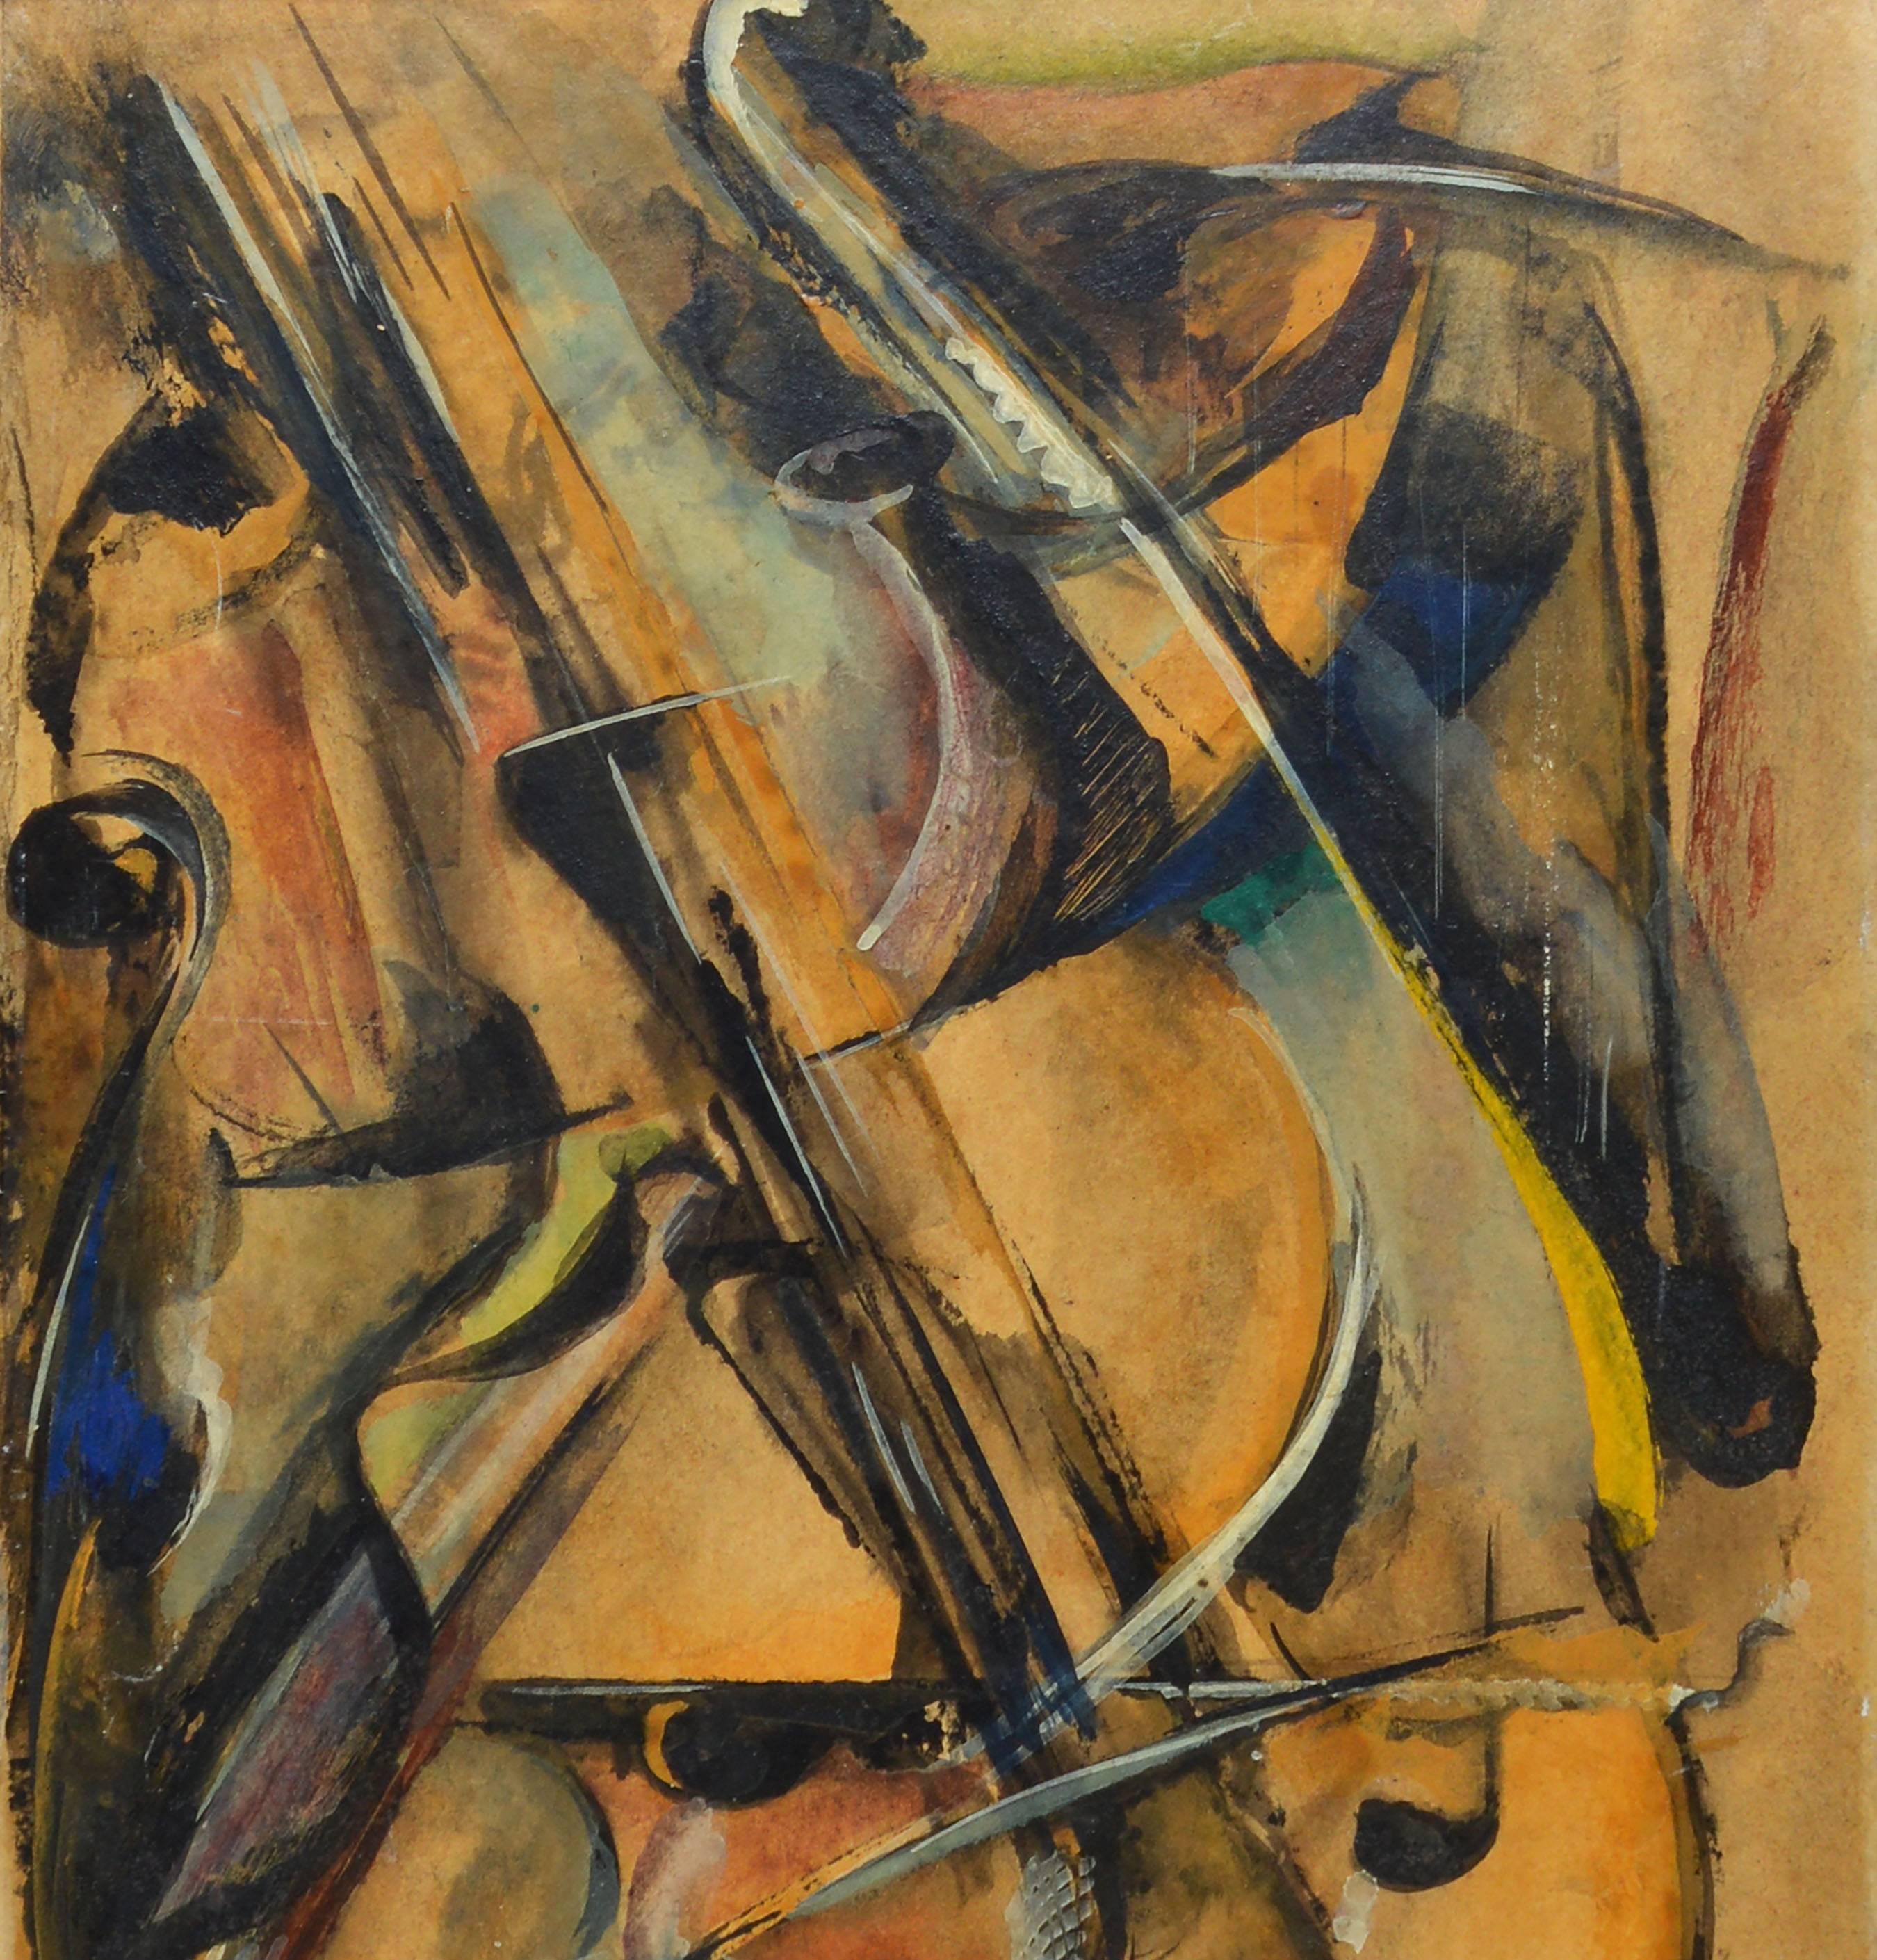 Cubist style still life painting with a violin.  Gouache and oil on board, circa 1956.  Signed in monogram lower right.  Displayed in a giltwood frame.  Image size, 9.5"L x 13"H, overall 15.5"Lx 18.5"H.